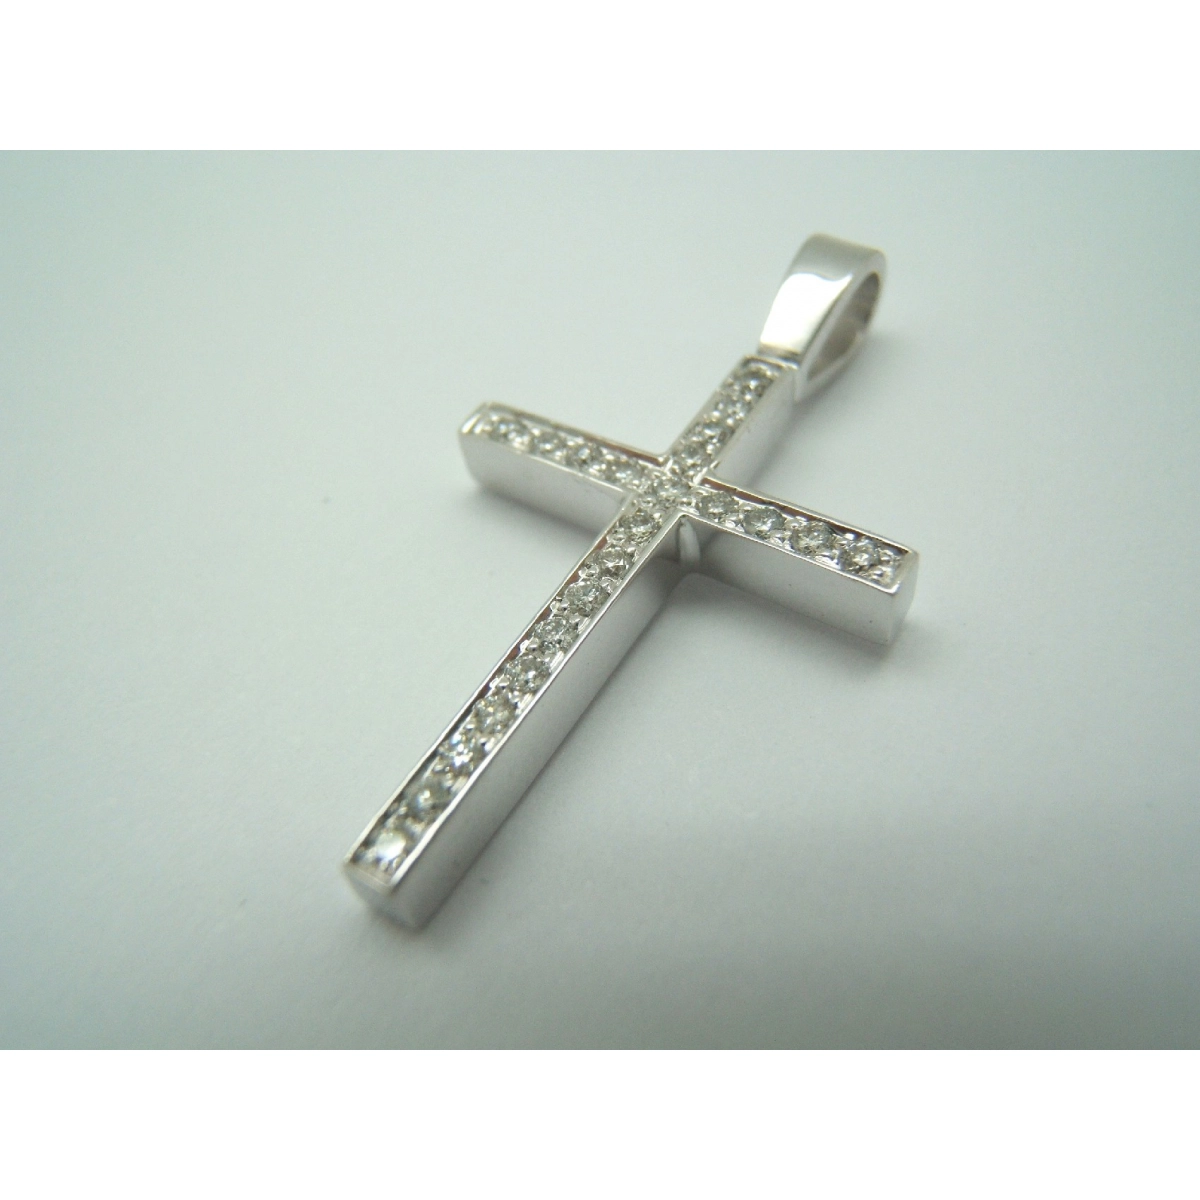 NECKLACE CROSS WHITE GOLD AND DIAMONDS C-185 B-79